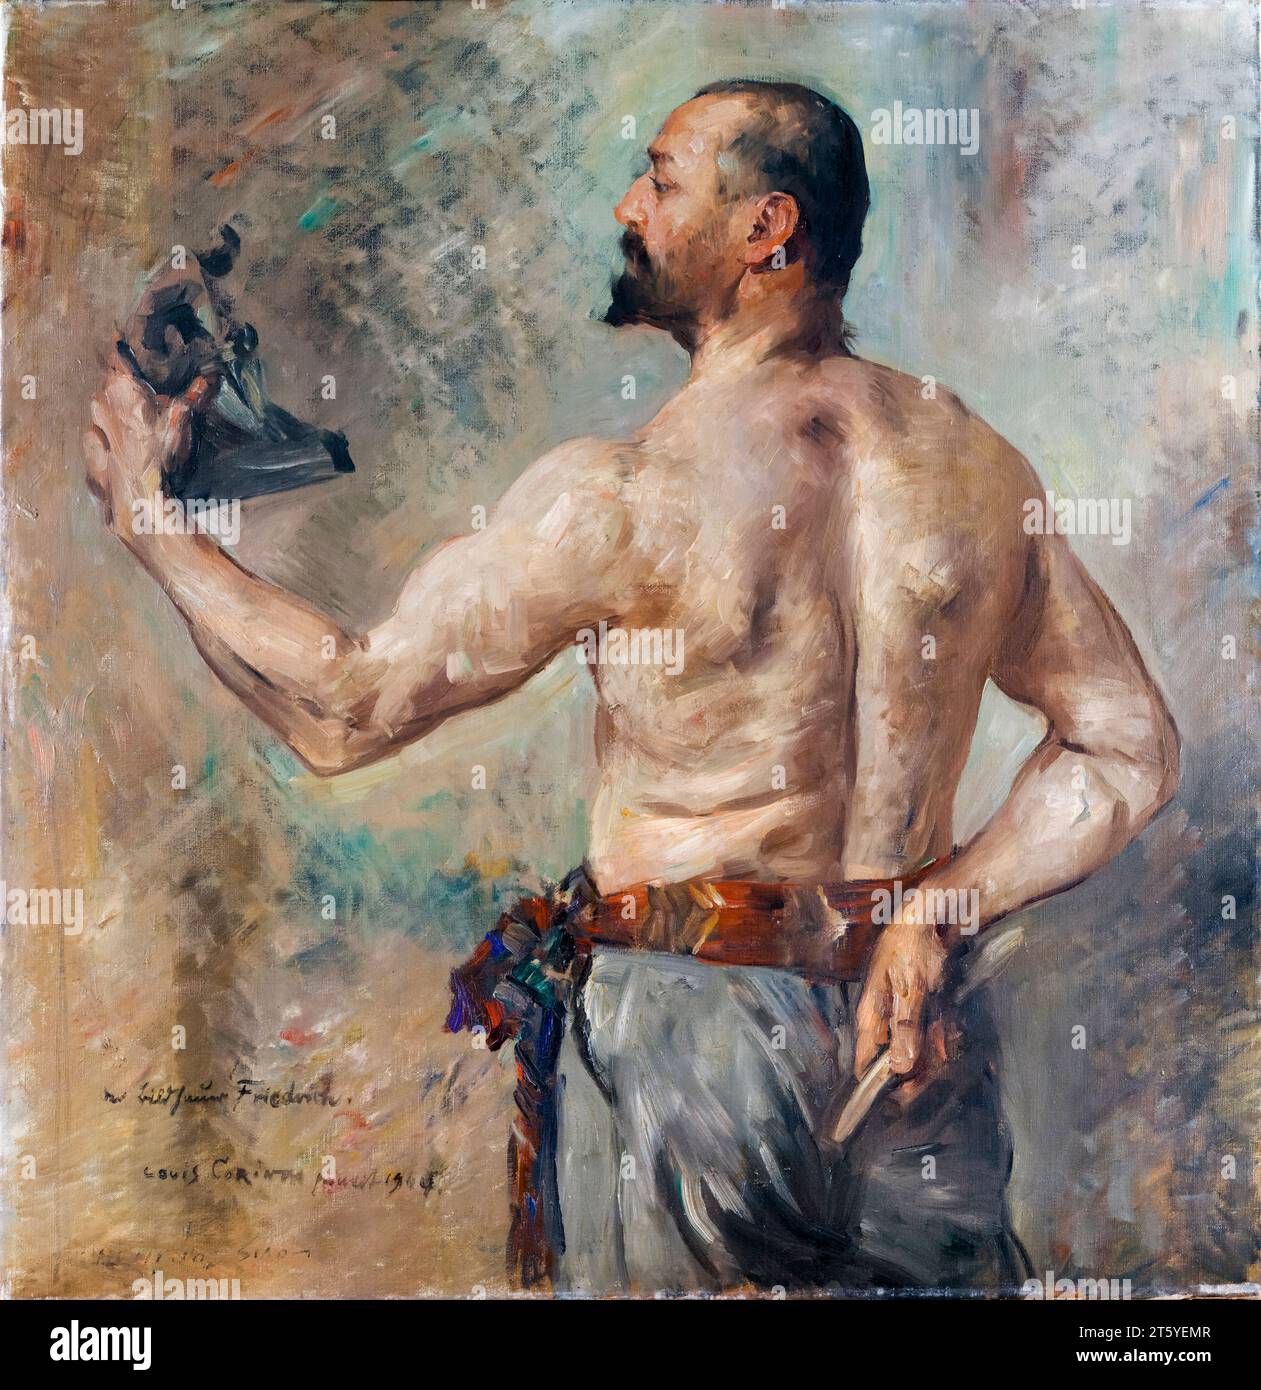 Portrait of the German sculptor Nikolaus Friedrich (1865-1914), painting in oil on canvas by Lovis Corinth, 1904 Stock Photo